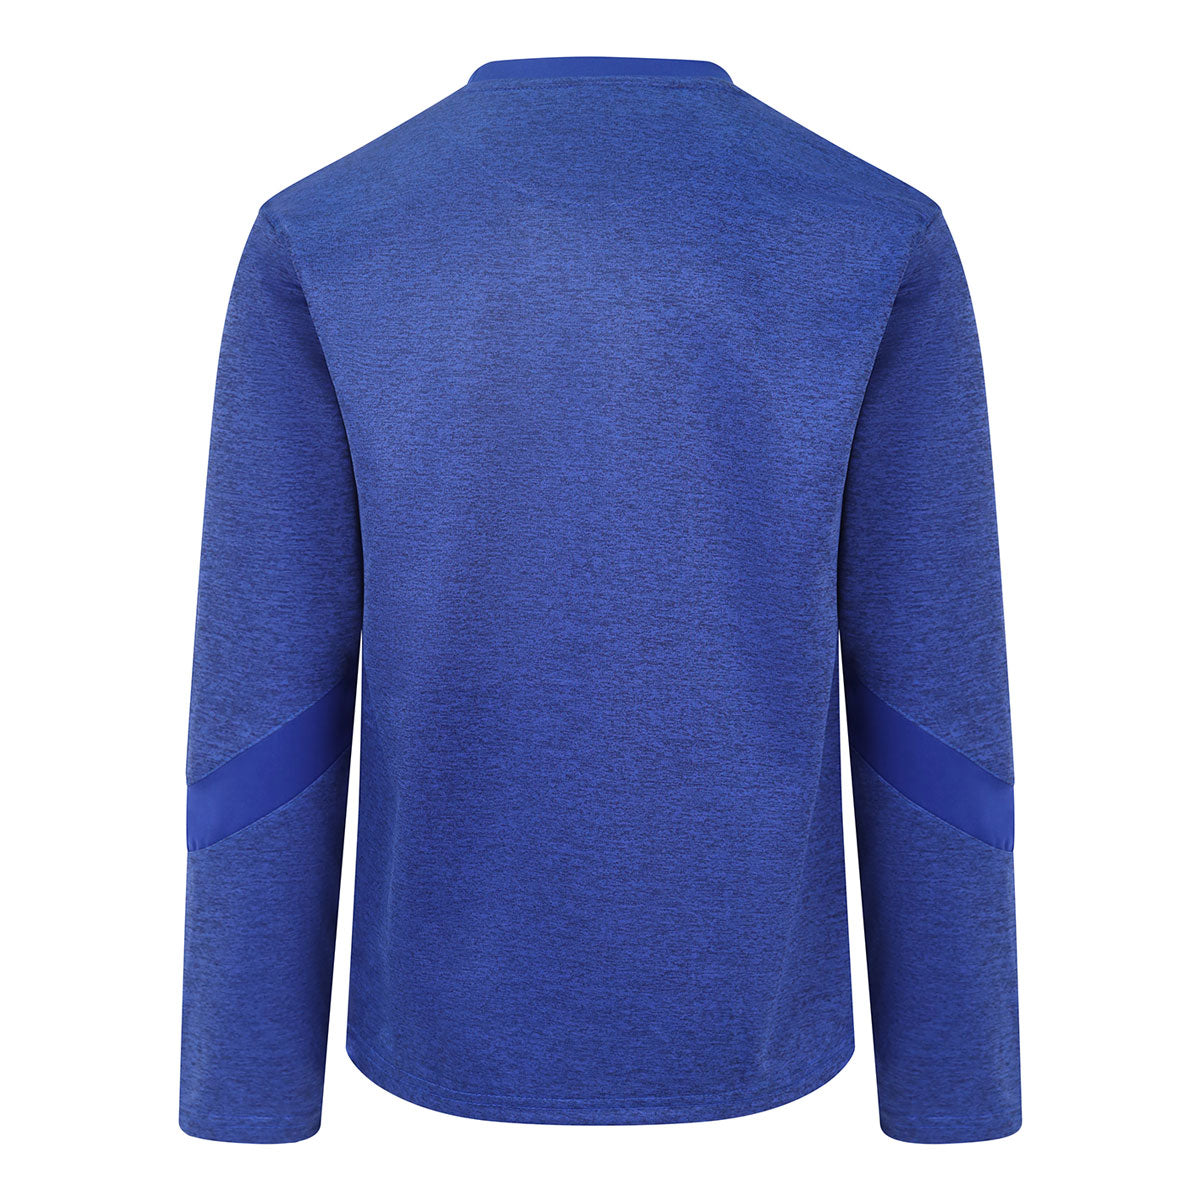 Mc Keever Shannon Gaels GAA Core 22 Sweat Top - Youth - Royal